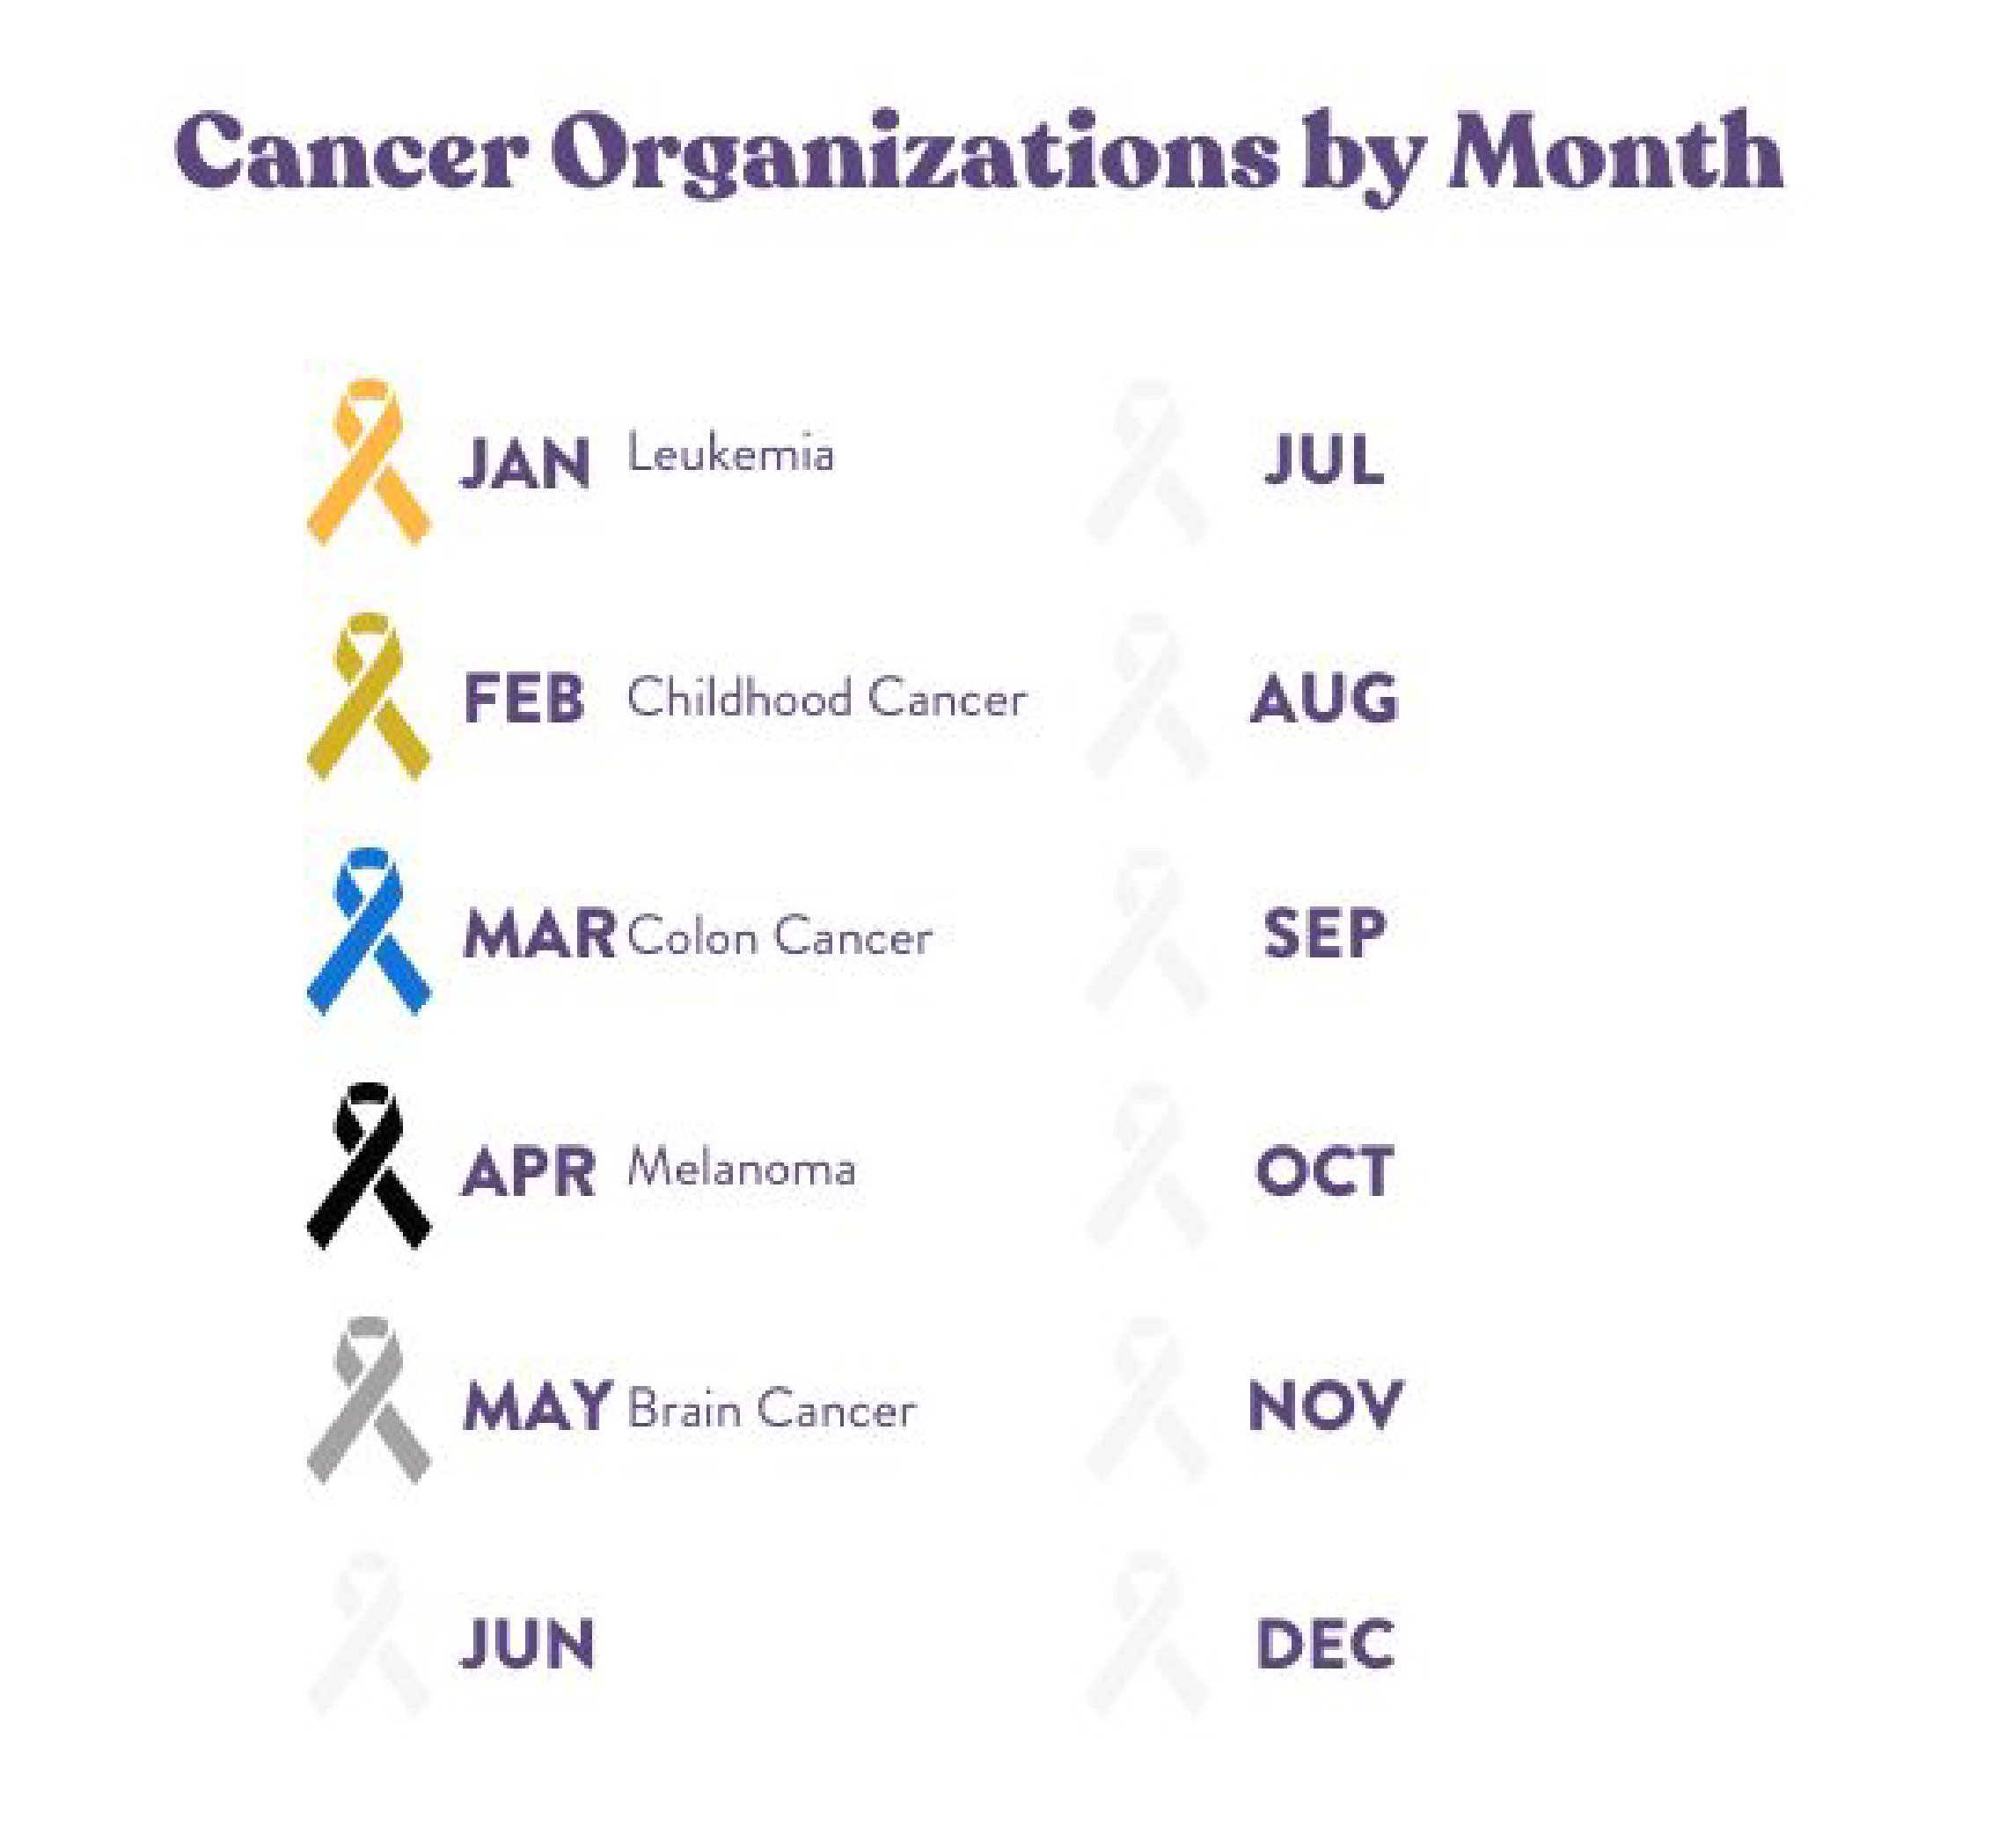 Cancer Organizations by Month (1).png__PID:0c059d30-ffe1-4287-a2cb-3797c4142711